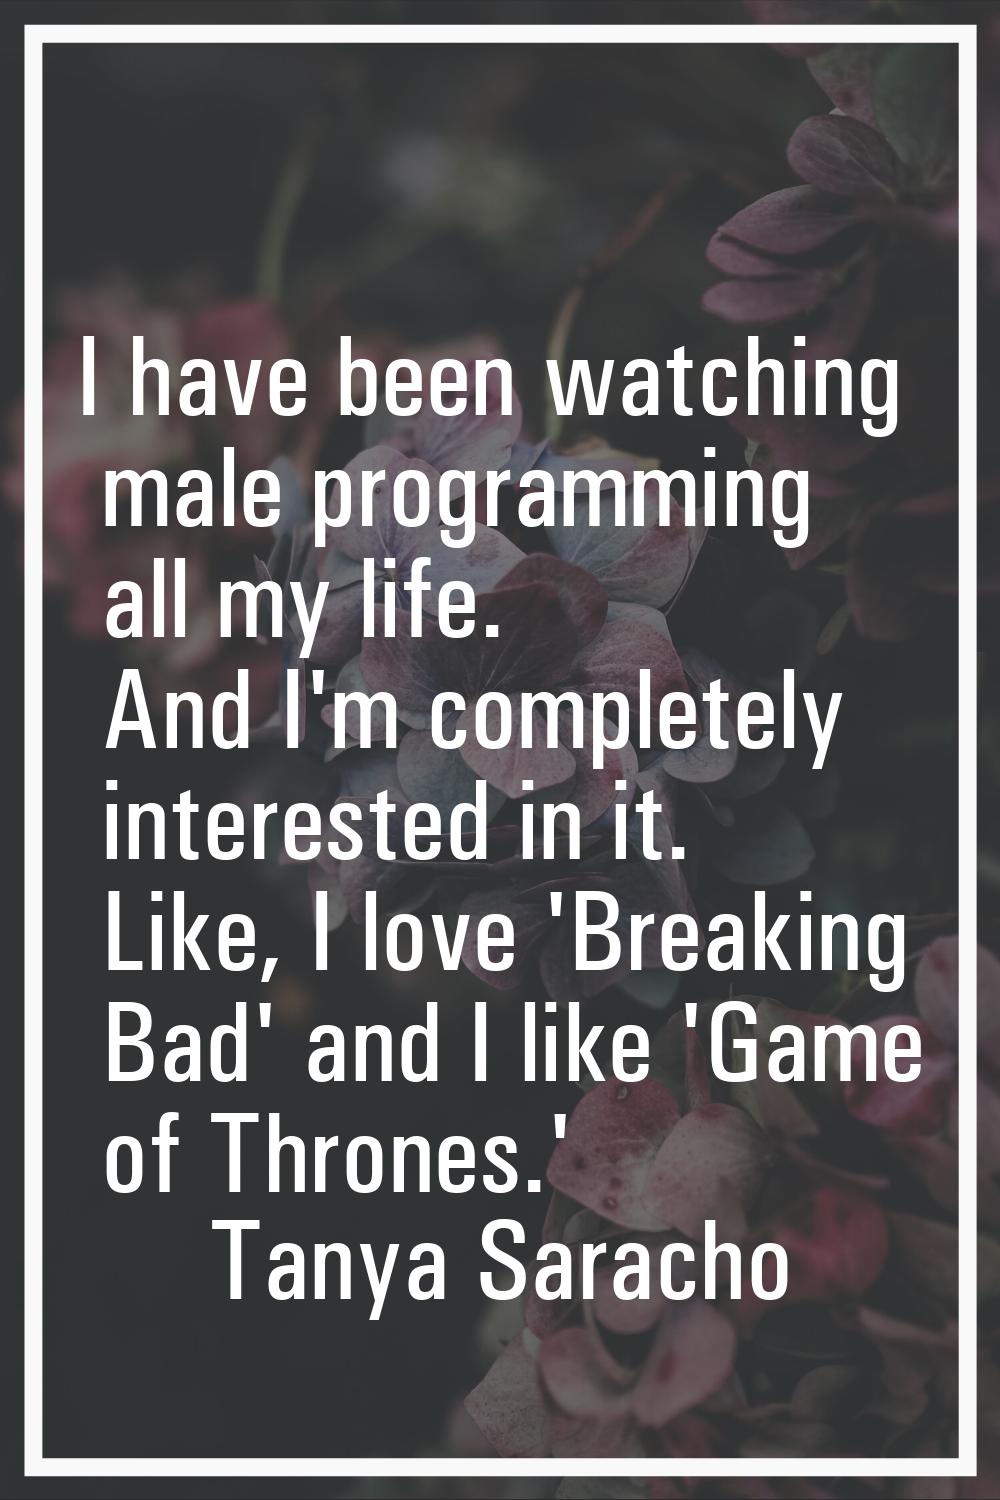 I have been watching male programming all my life. And I'm completely interested in it. Like, I lov